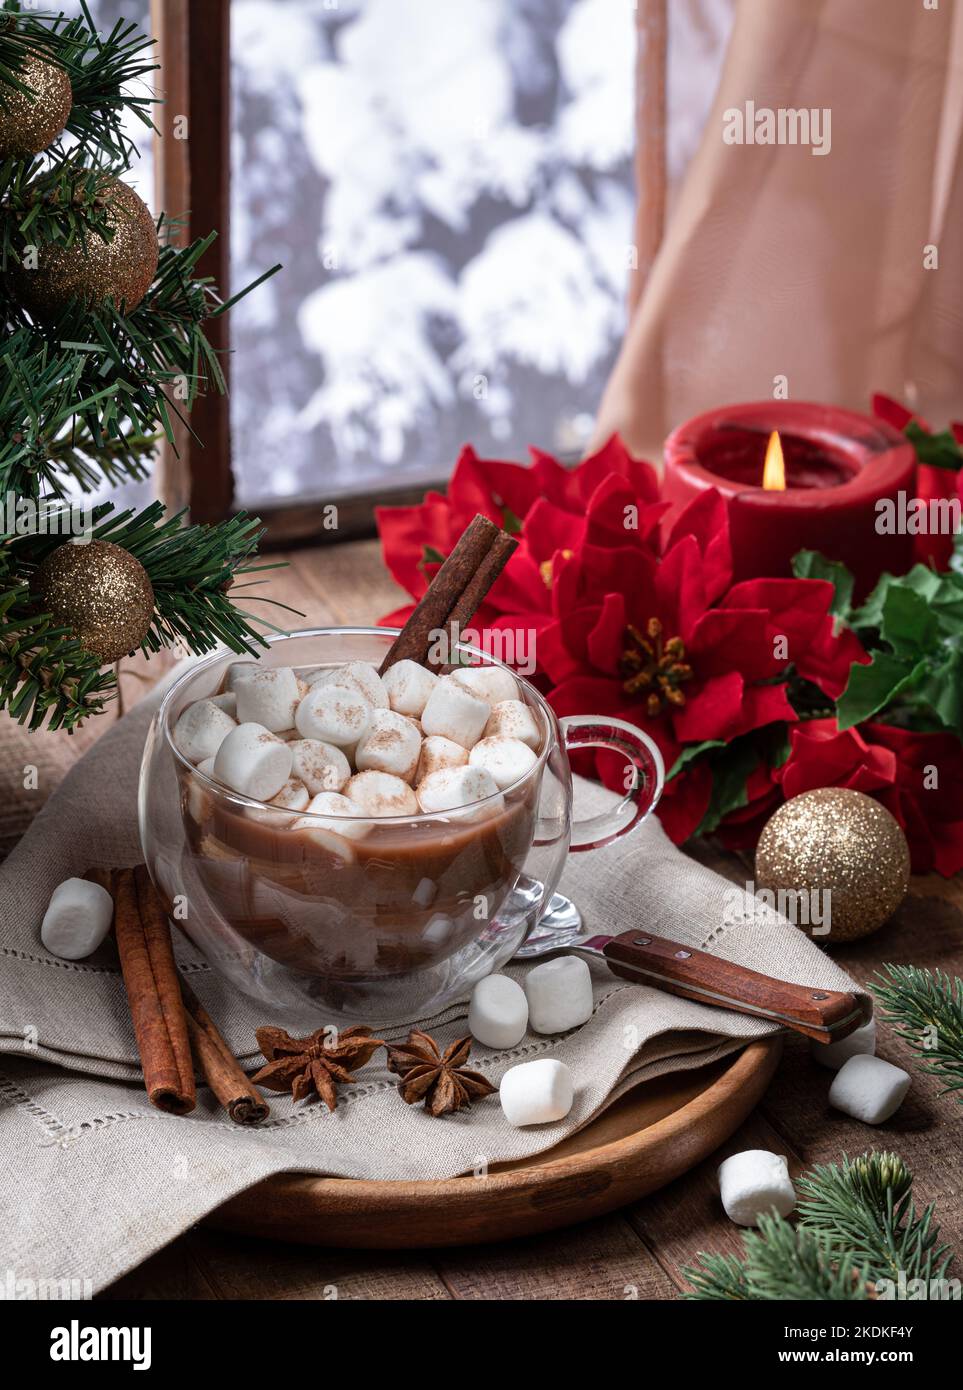 https://c8.alamy.com/comp/2KDKF4Y/cup-of-hot-chocolate-with-marshmallows-and-cinnamon-with-holiday-decorations-on-a-wooden-table-by-a-window-with-winter-background-2KDKF4Y.jpg